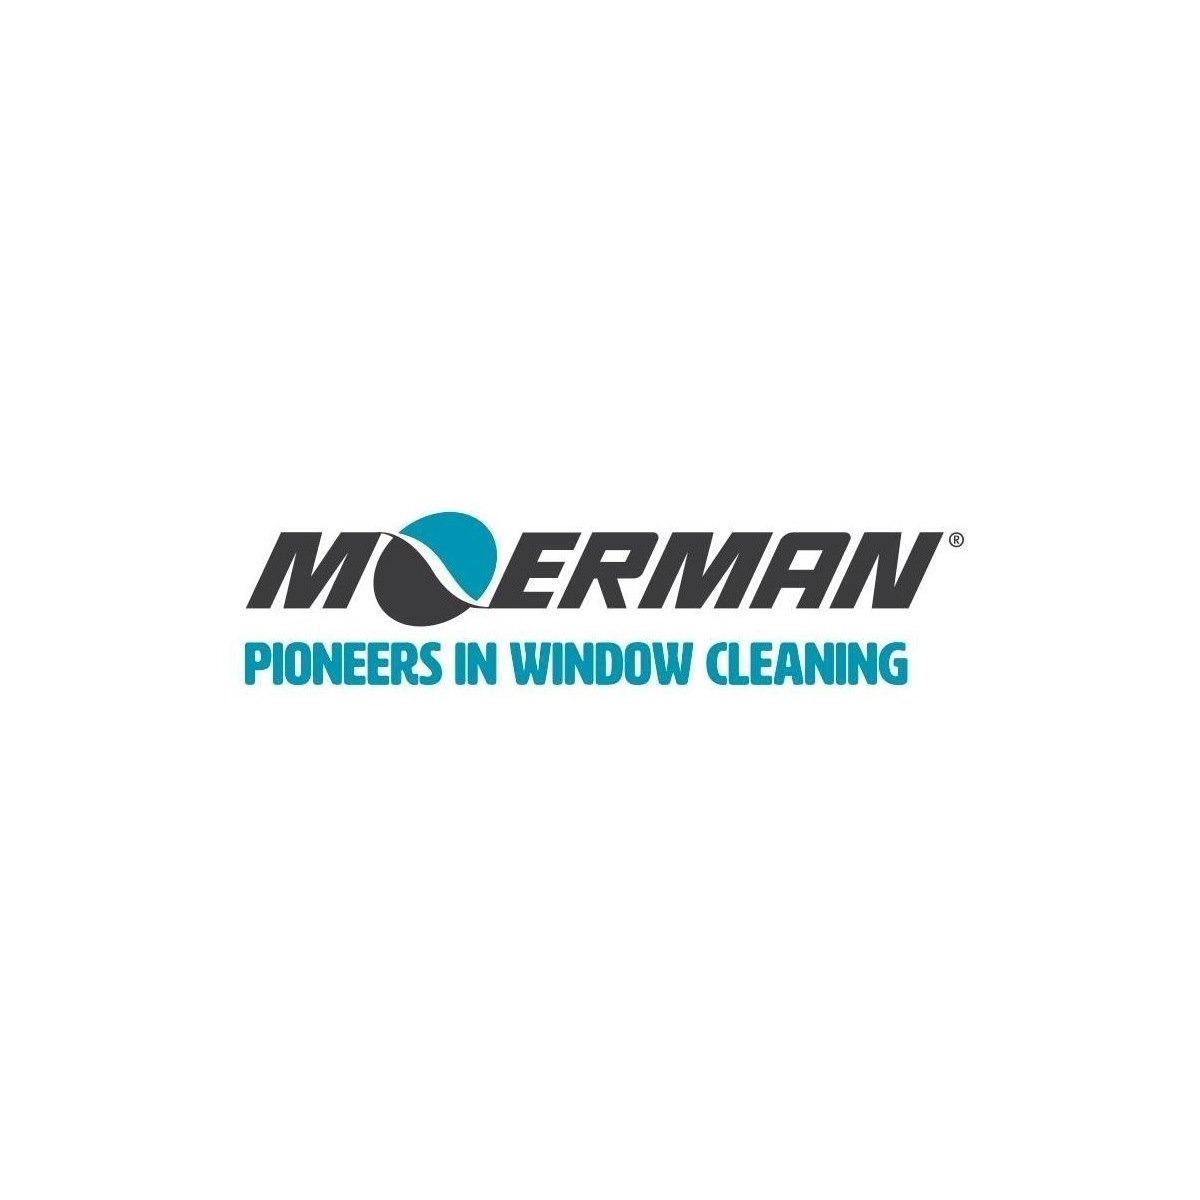 where to buy Moerman Window Cleaning Products